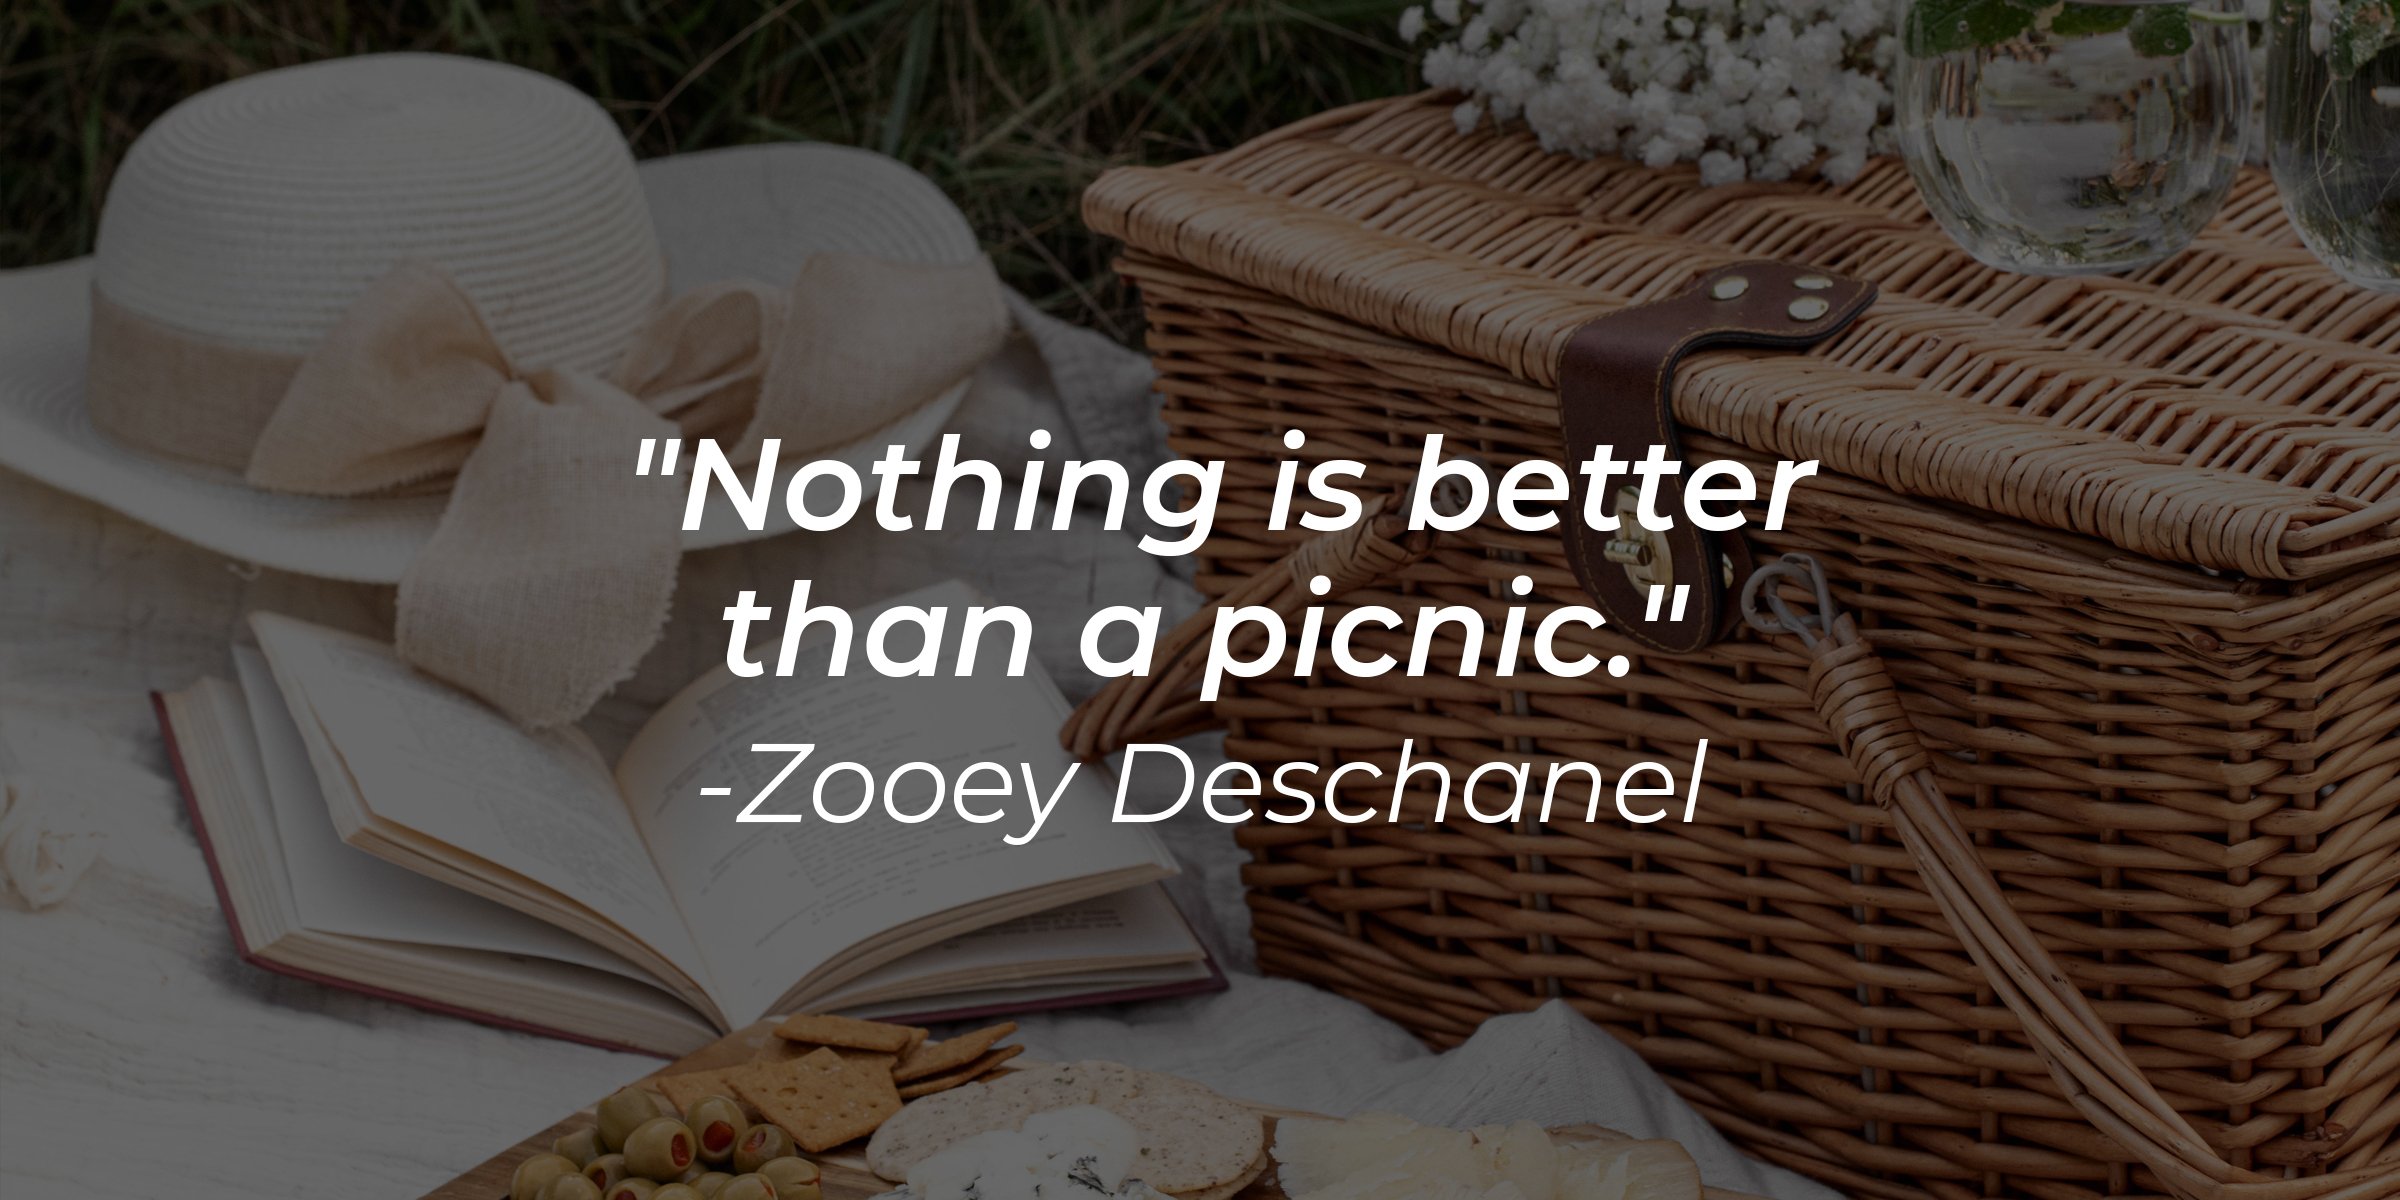 Source: Unsplash | Picnic items with the quote: "Nothing is better than a picnic."